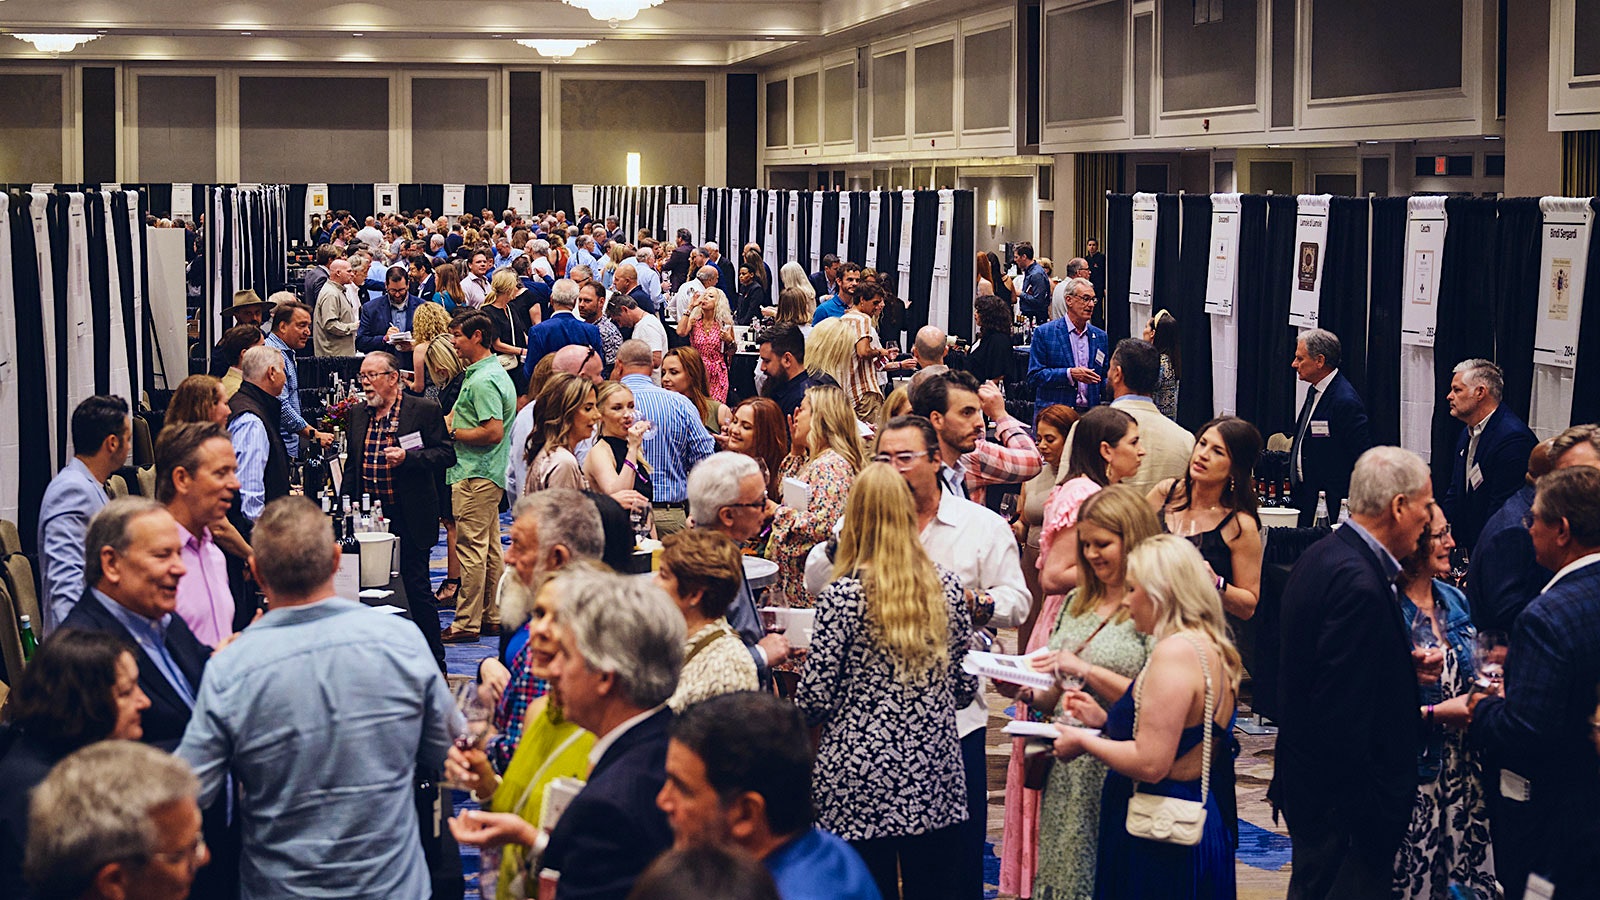  A packed crowd at the Wine Spectator Grand Tour tasting in New Orleans.